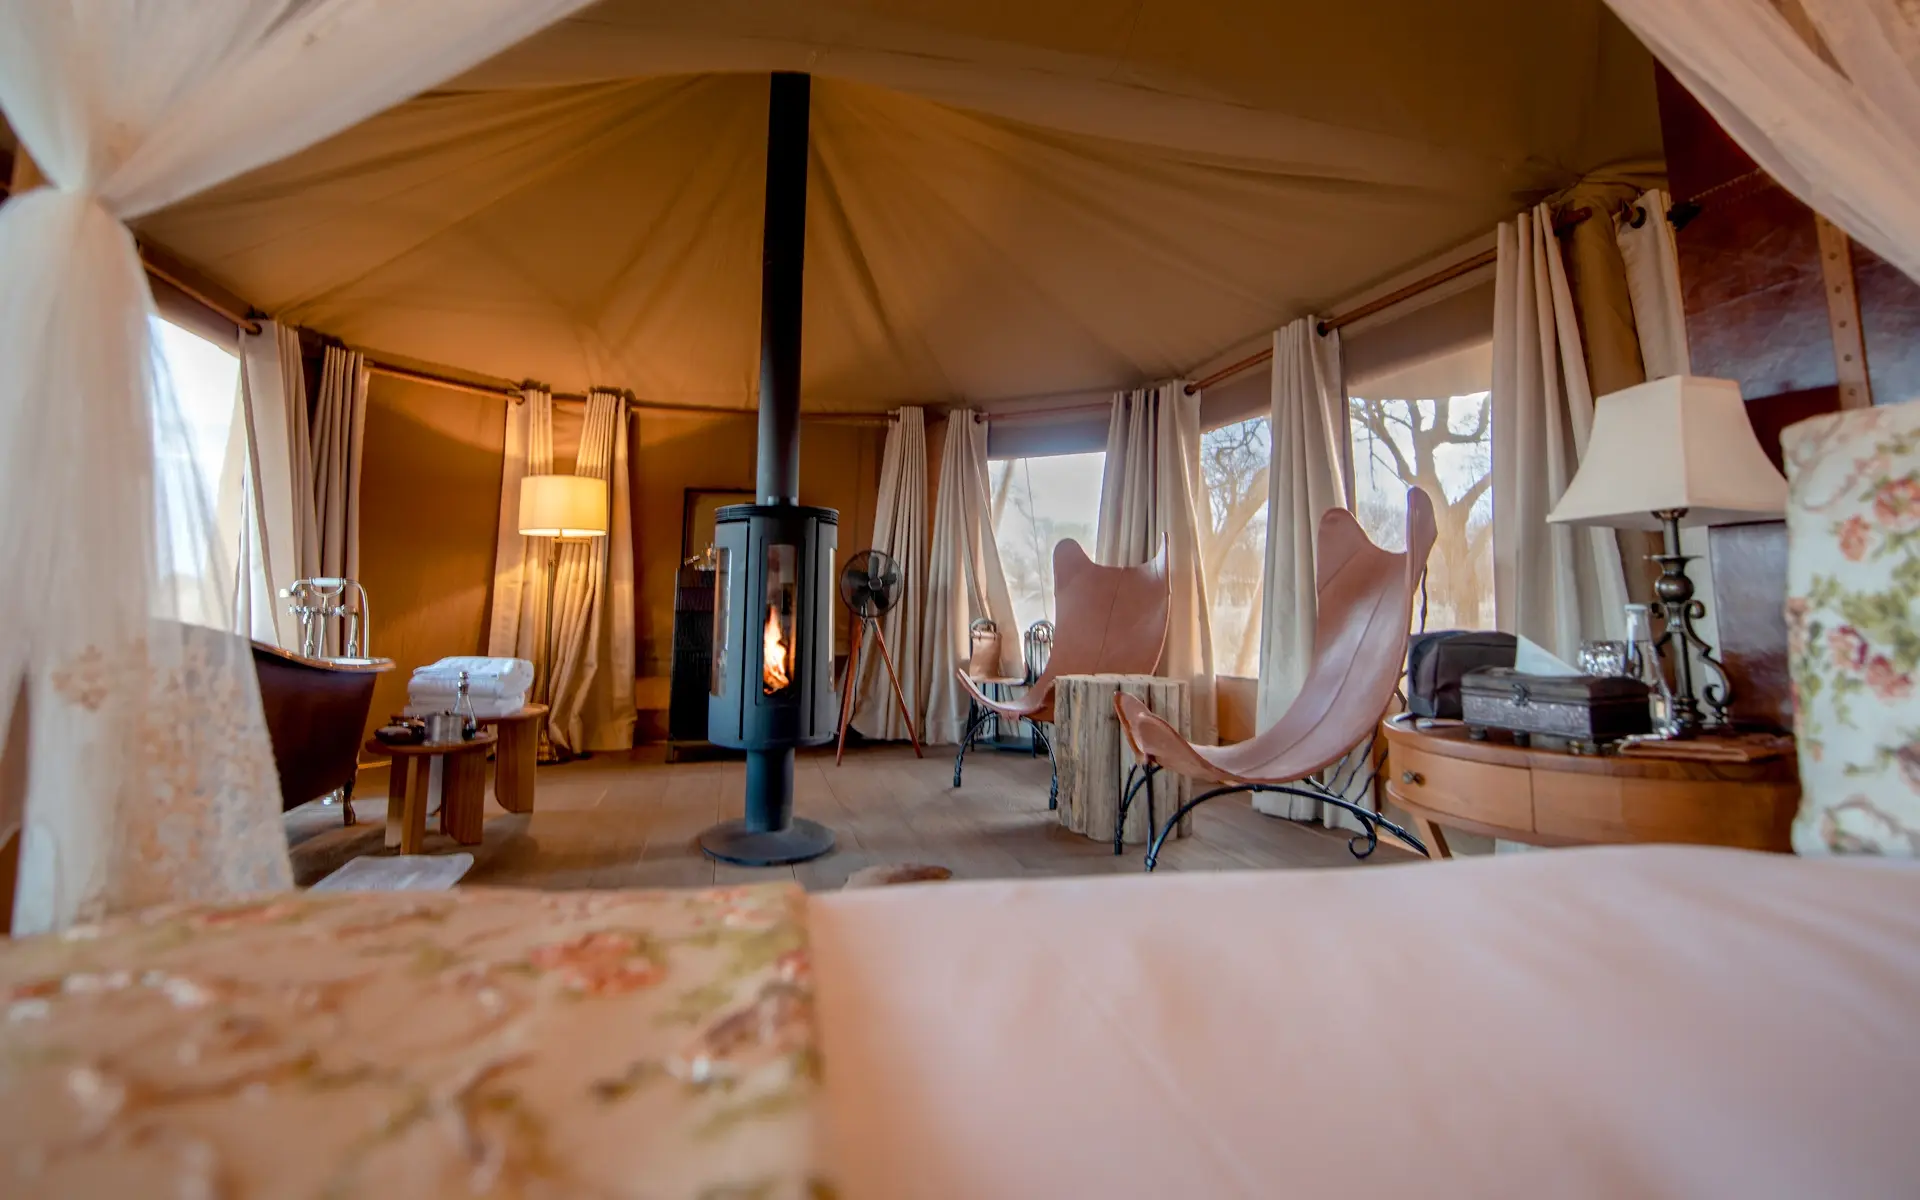 Wood burning stove in the luxury African tent